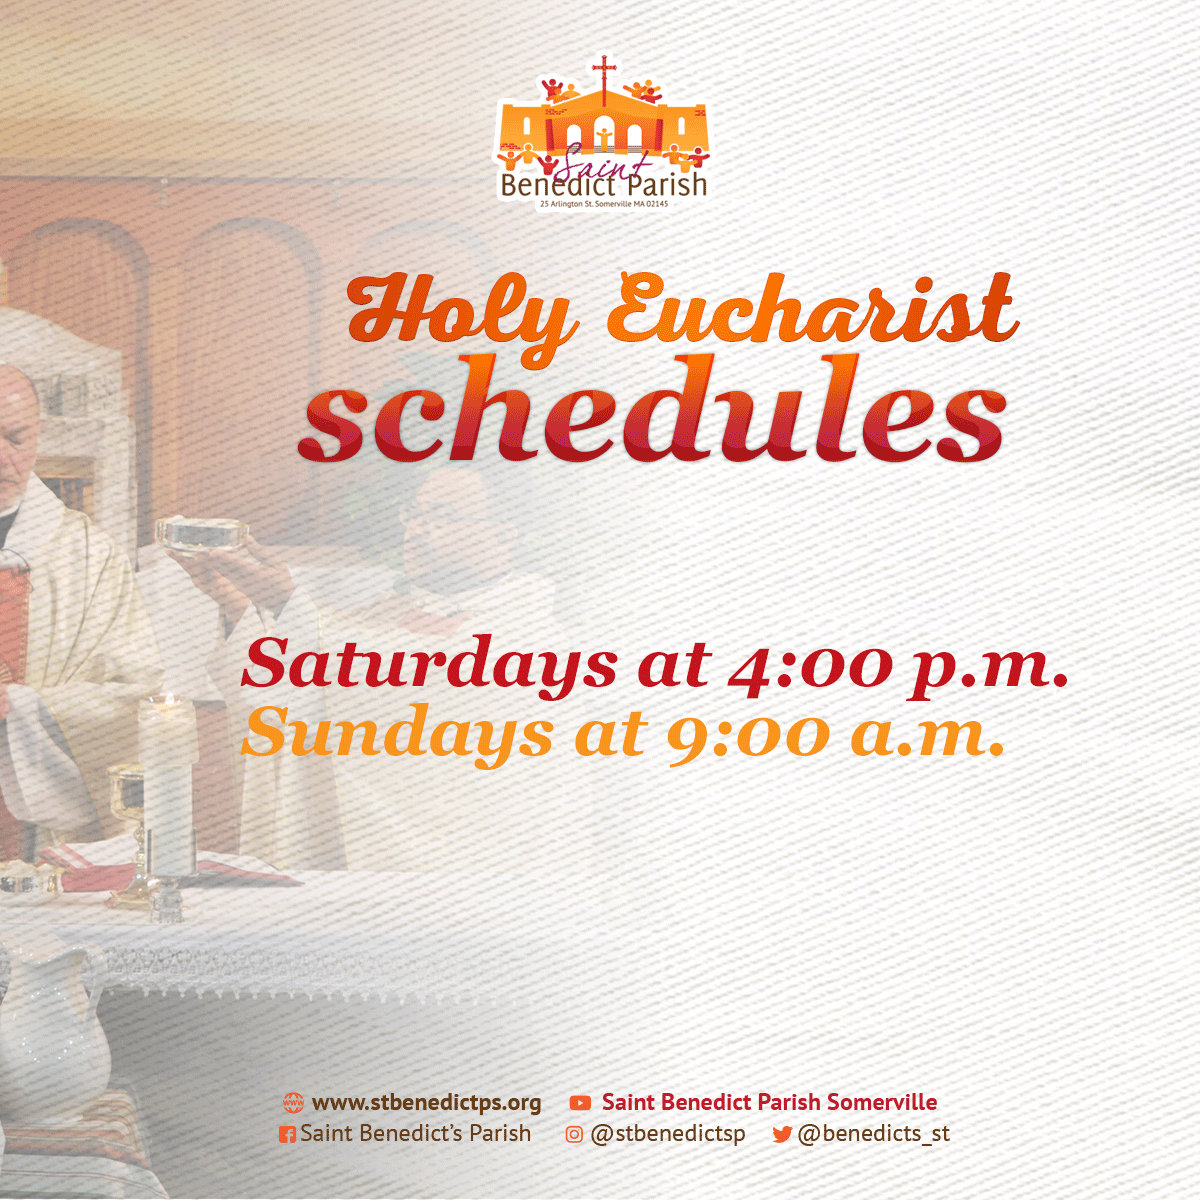 Come and join us for a moment of closeness, worship, and forgiveness with Jesus Eucharist.
#HolyEucharist #JesusEucharist #MassSchedules #Worship #Forgiveness #Somerville #Boston